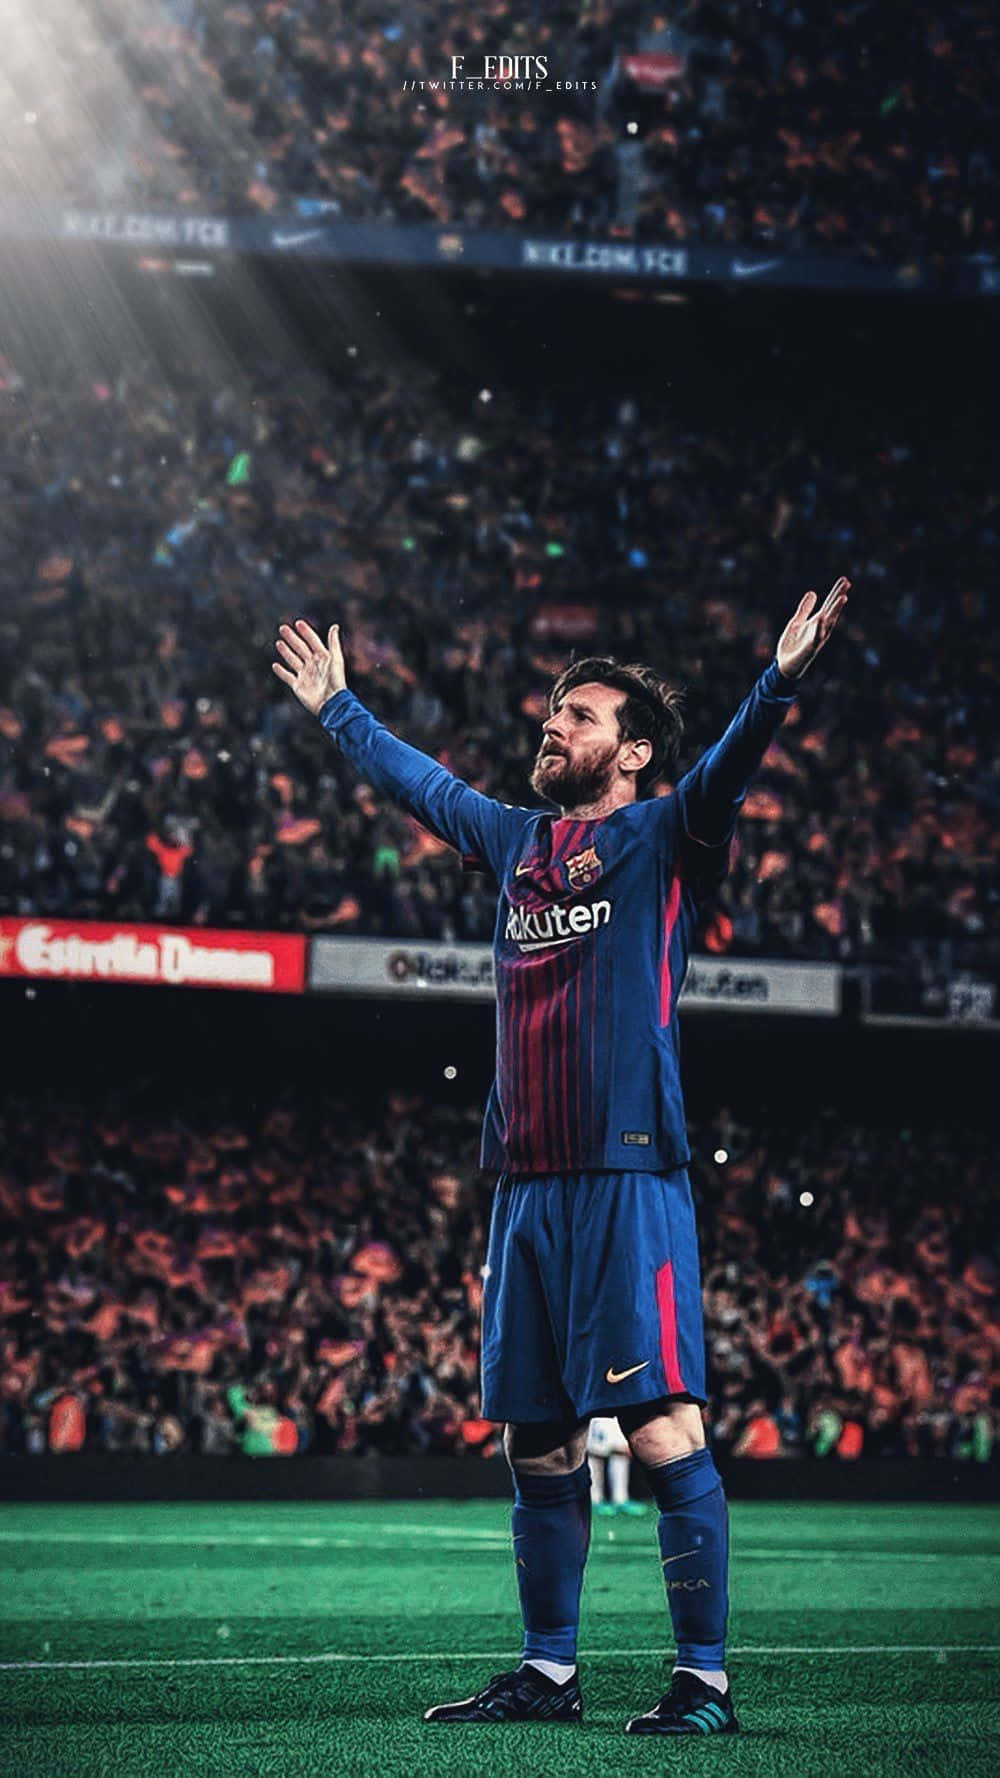 "Be cool and play like Messi" Wallpaper